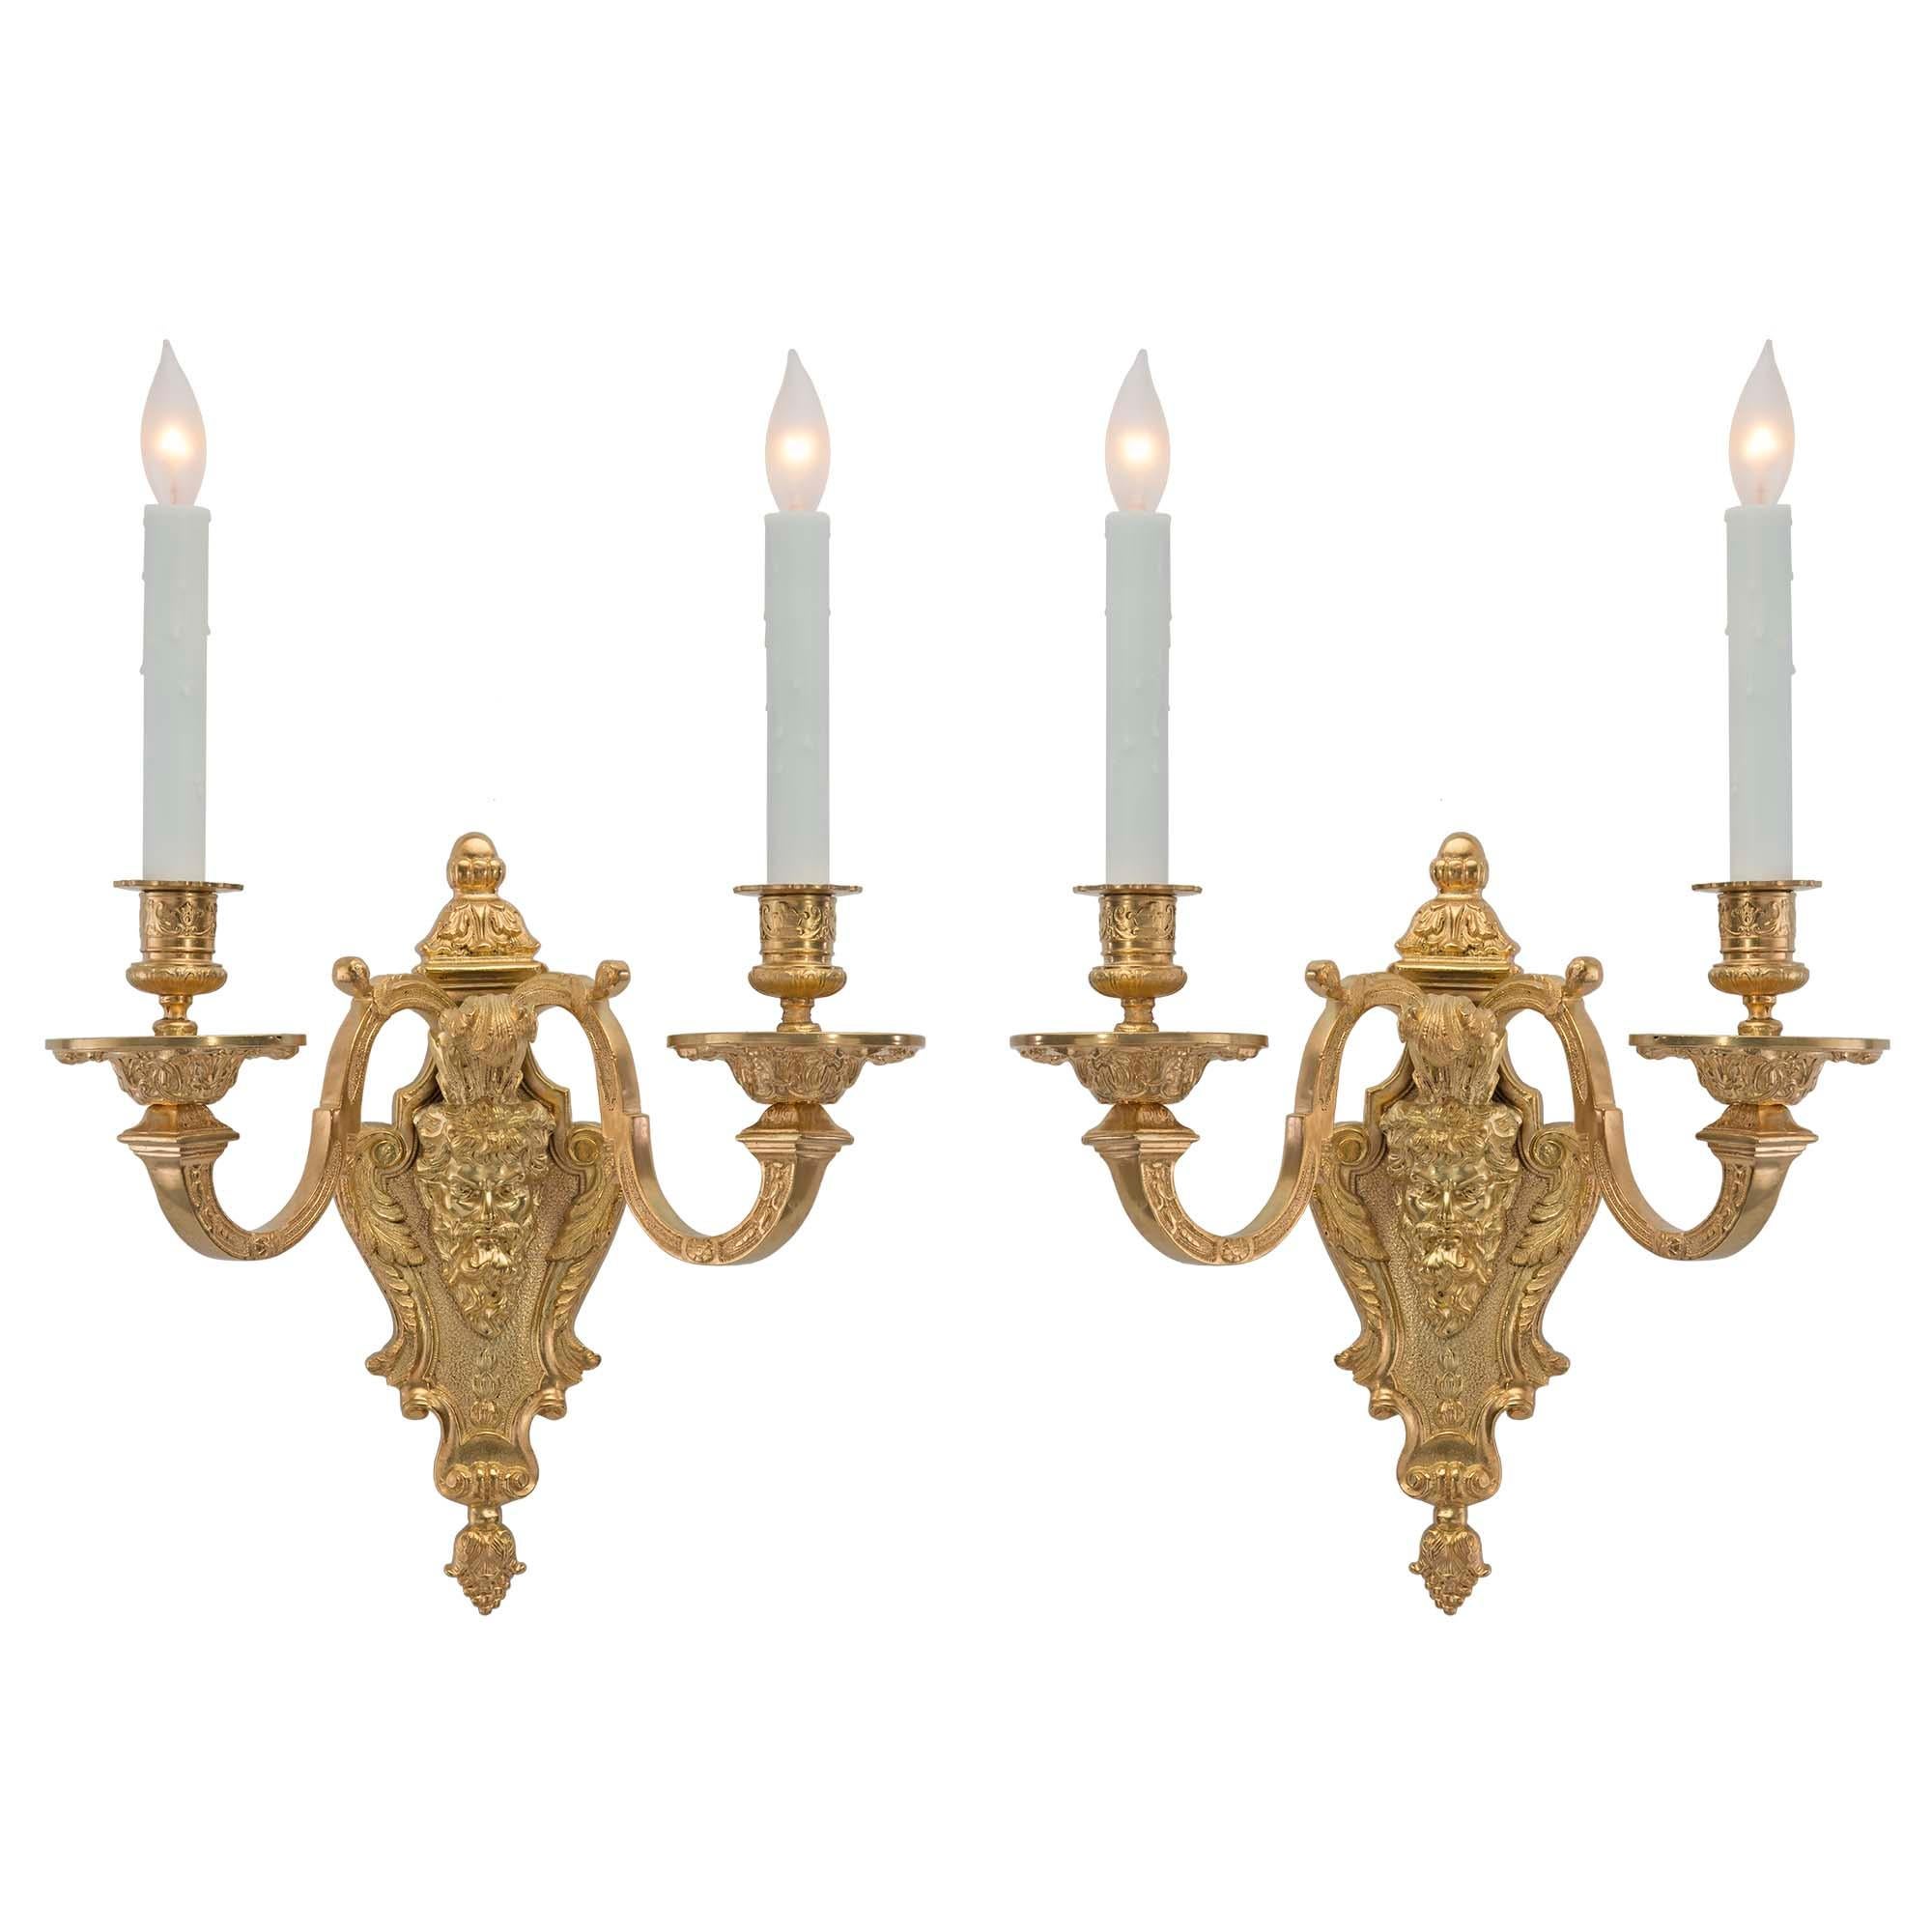 An elegant pair of French 19th century Renaissance two arm ormolu sconces. Each sconce is centered by a finely chased bottom acorn finial. At the center is a handsome and detailed bearded man on a hammered background with scrolled acanthus leaves